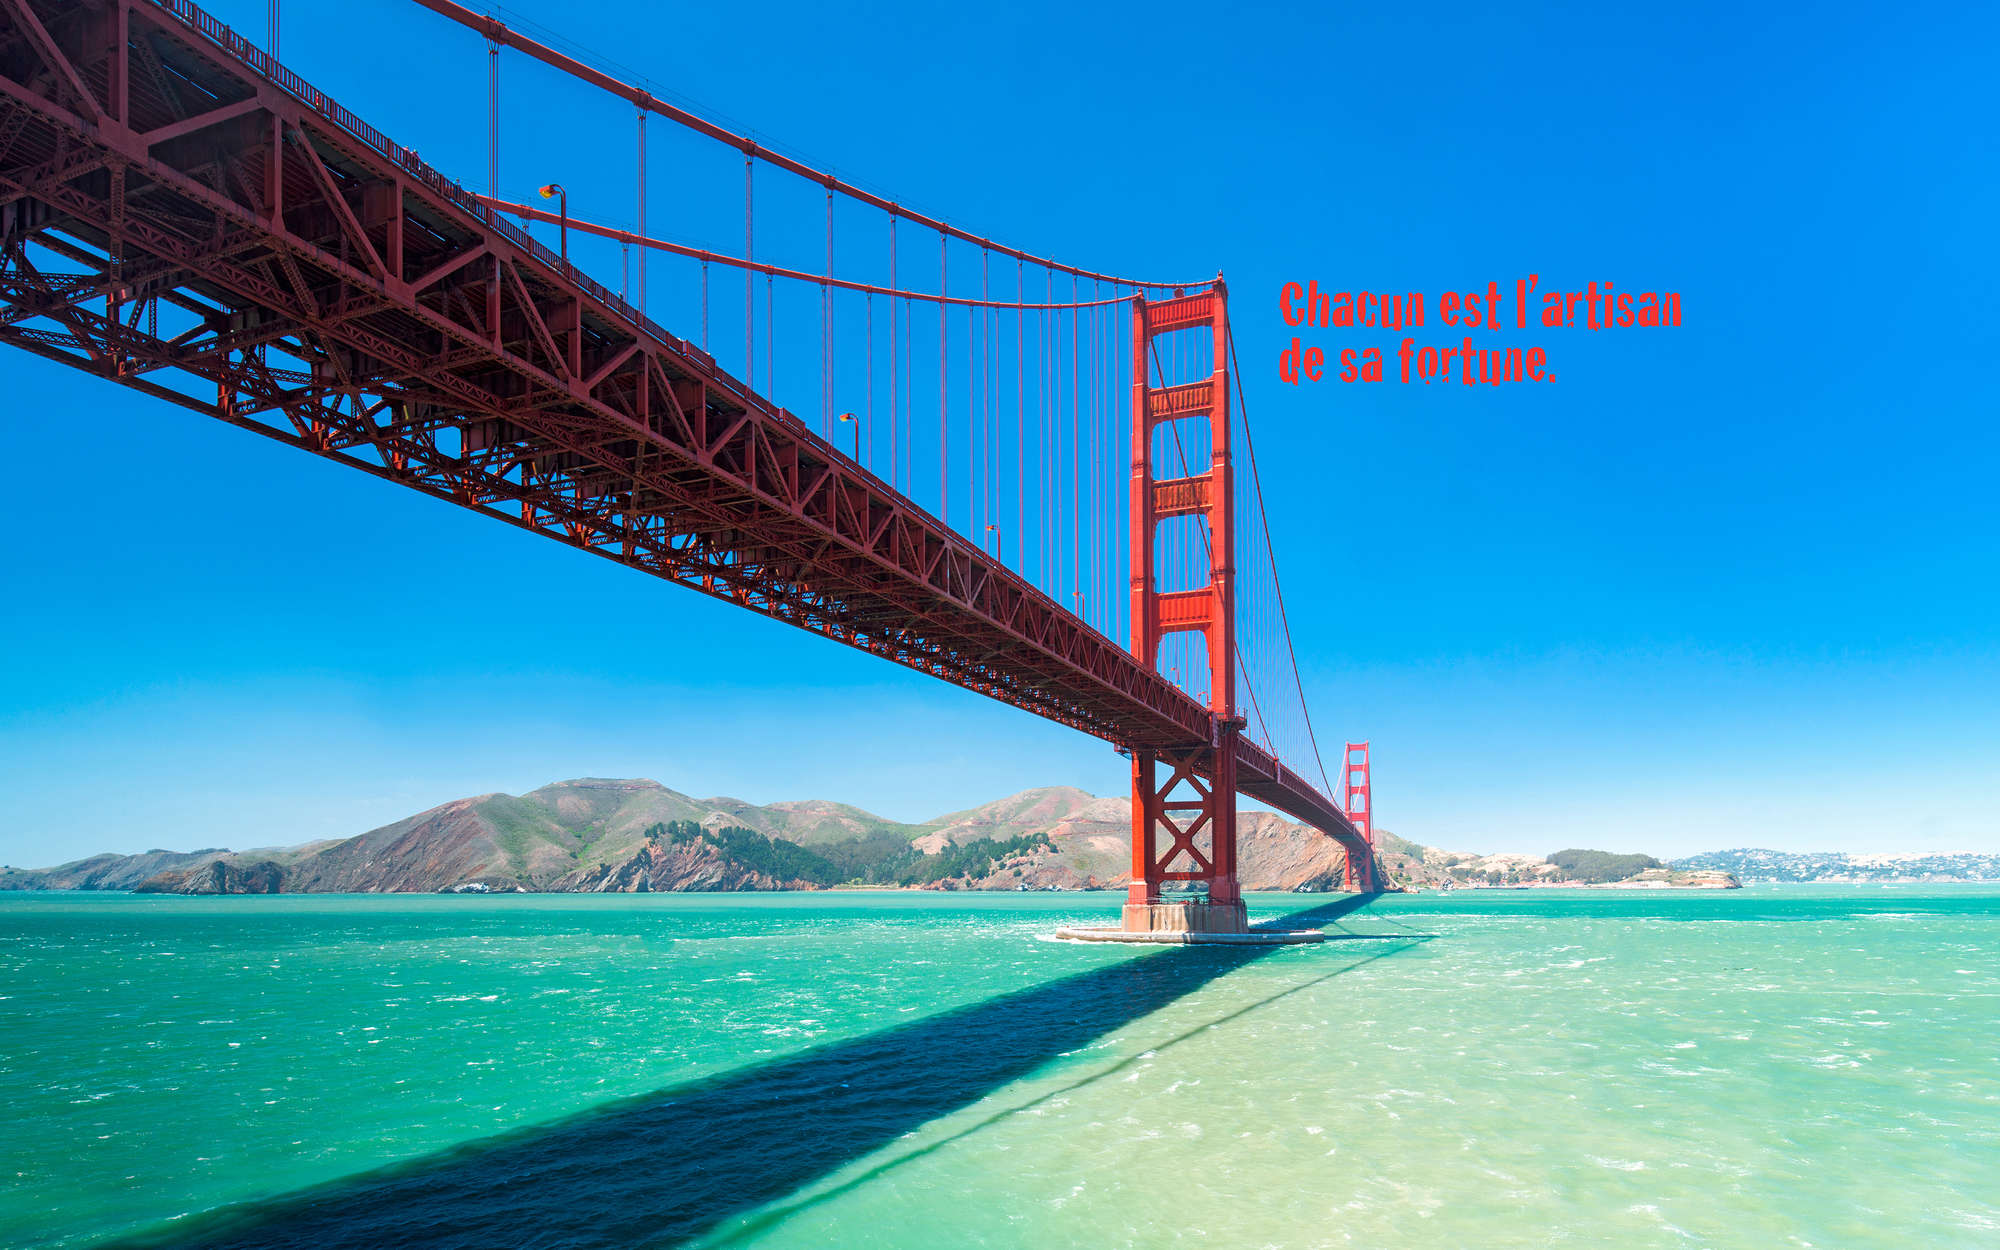             Golden Gate Bridge Wallpaper with French Lettering - Textured Non-woven
        